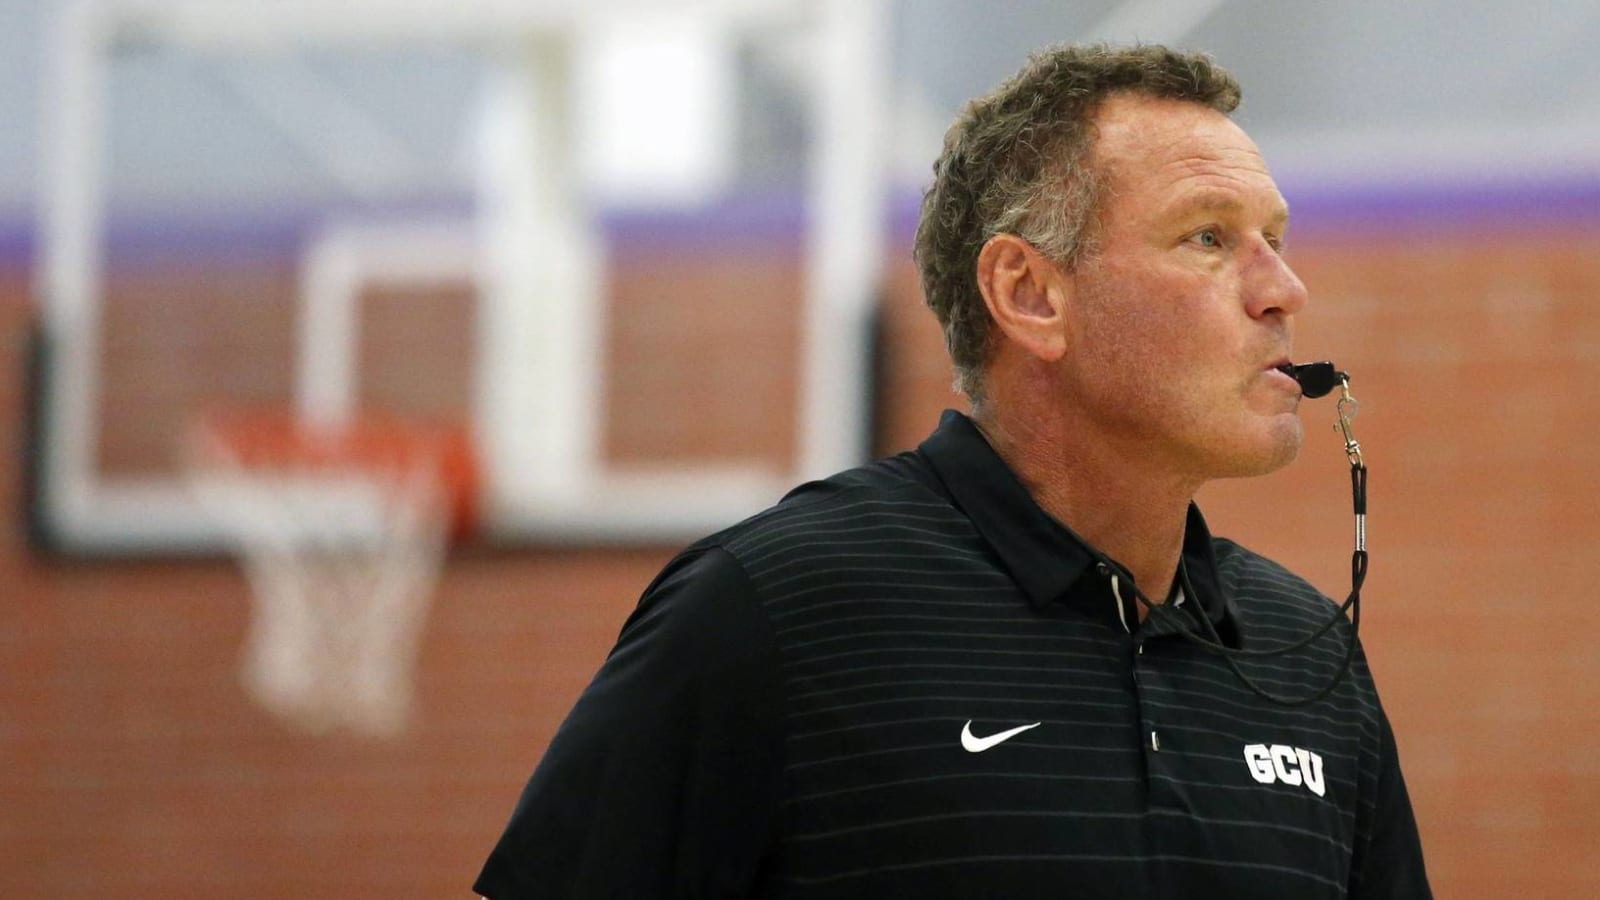 Dan Majerle suing Grand Canyon after being fired